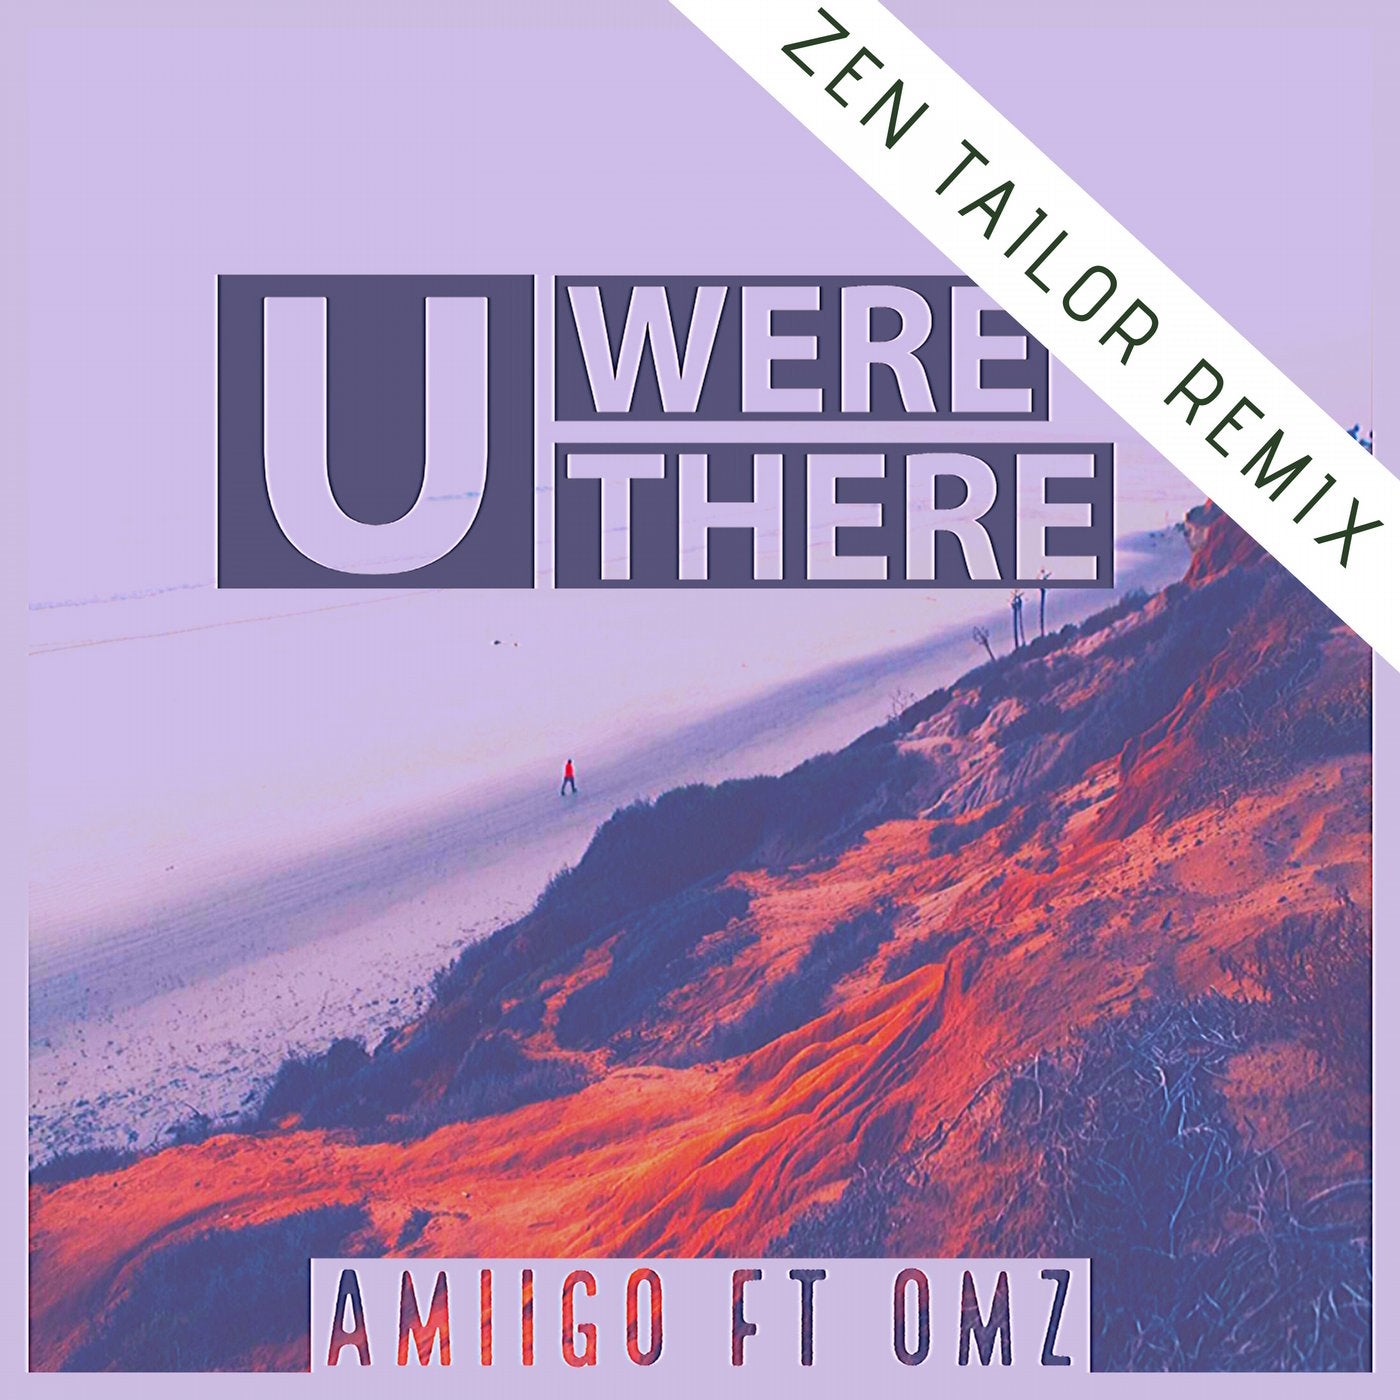 U Were There (ft. OMZ) Zen Tailor Remix